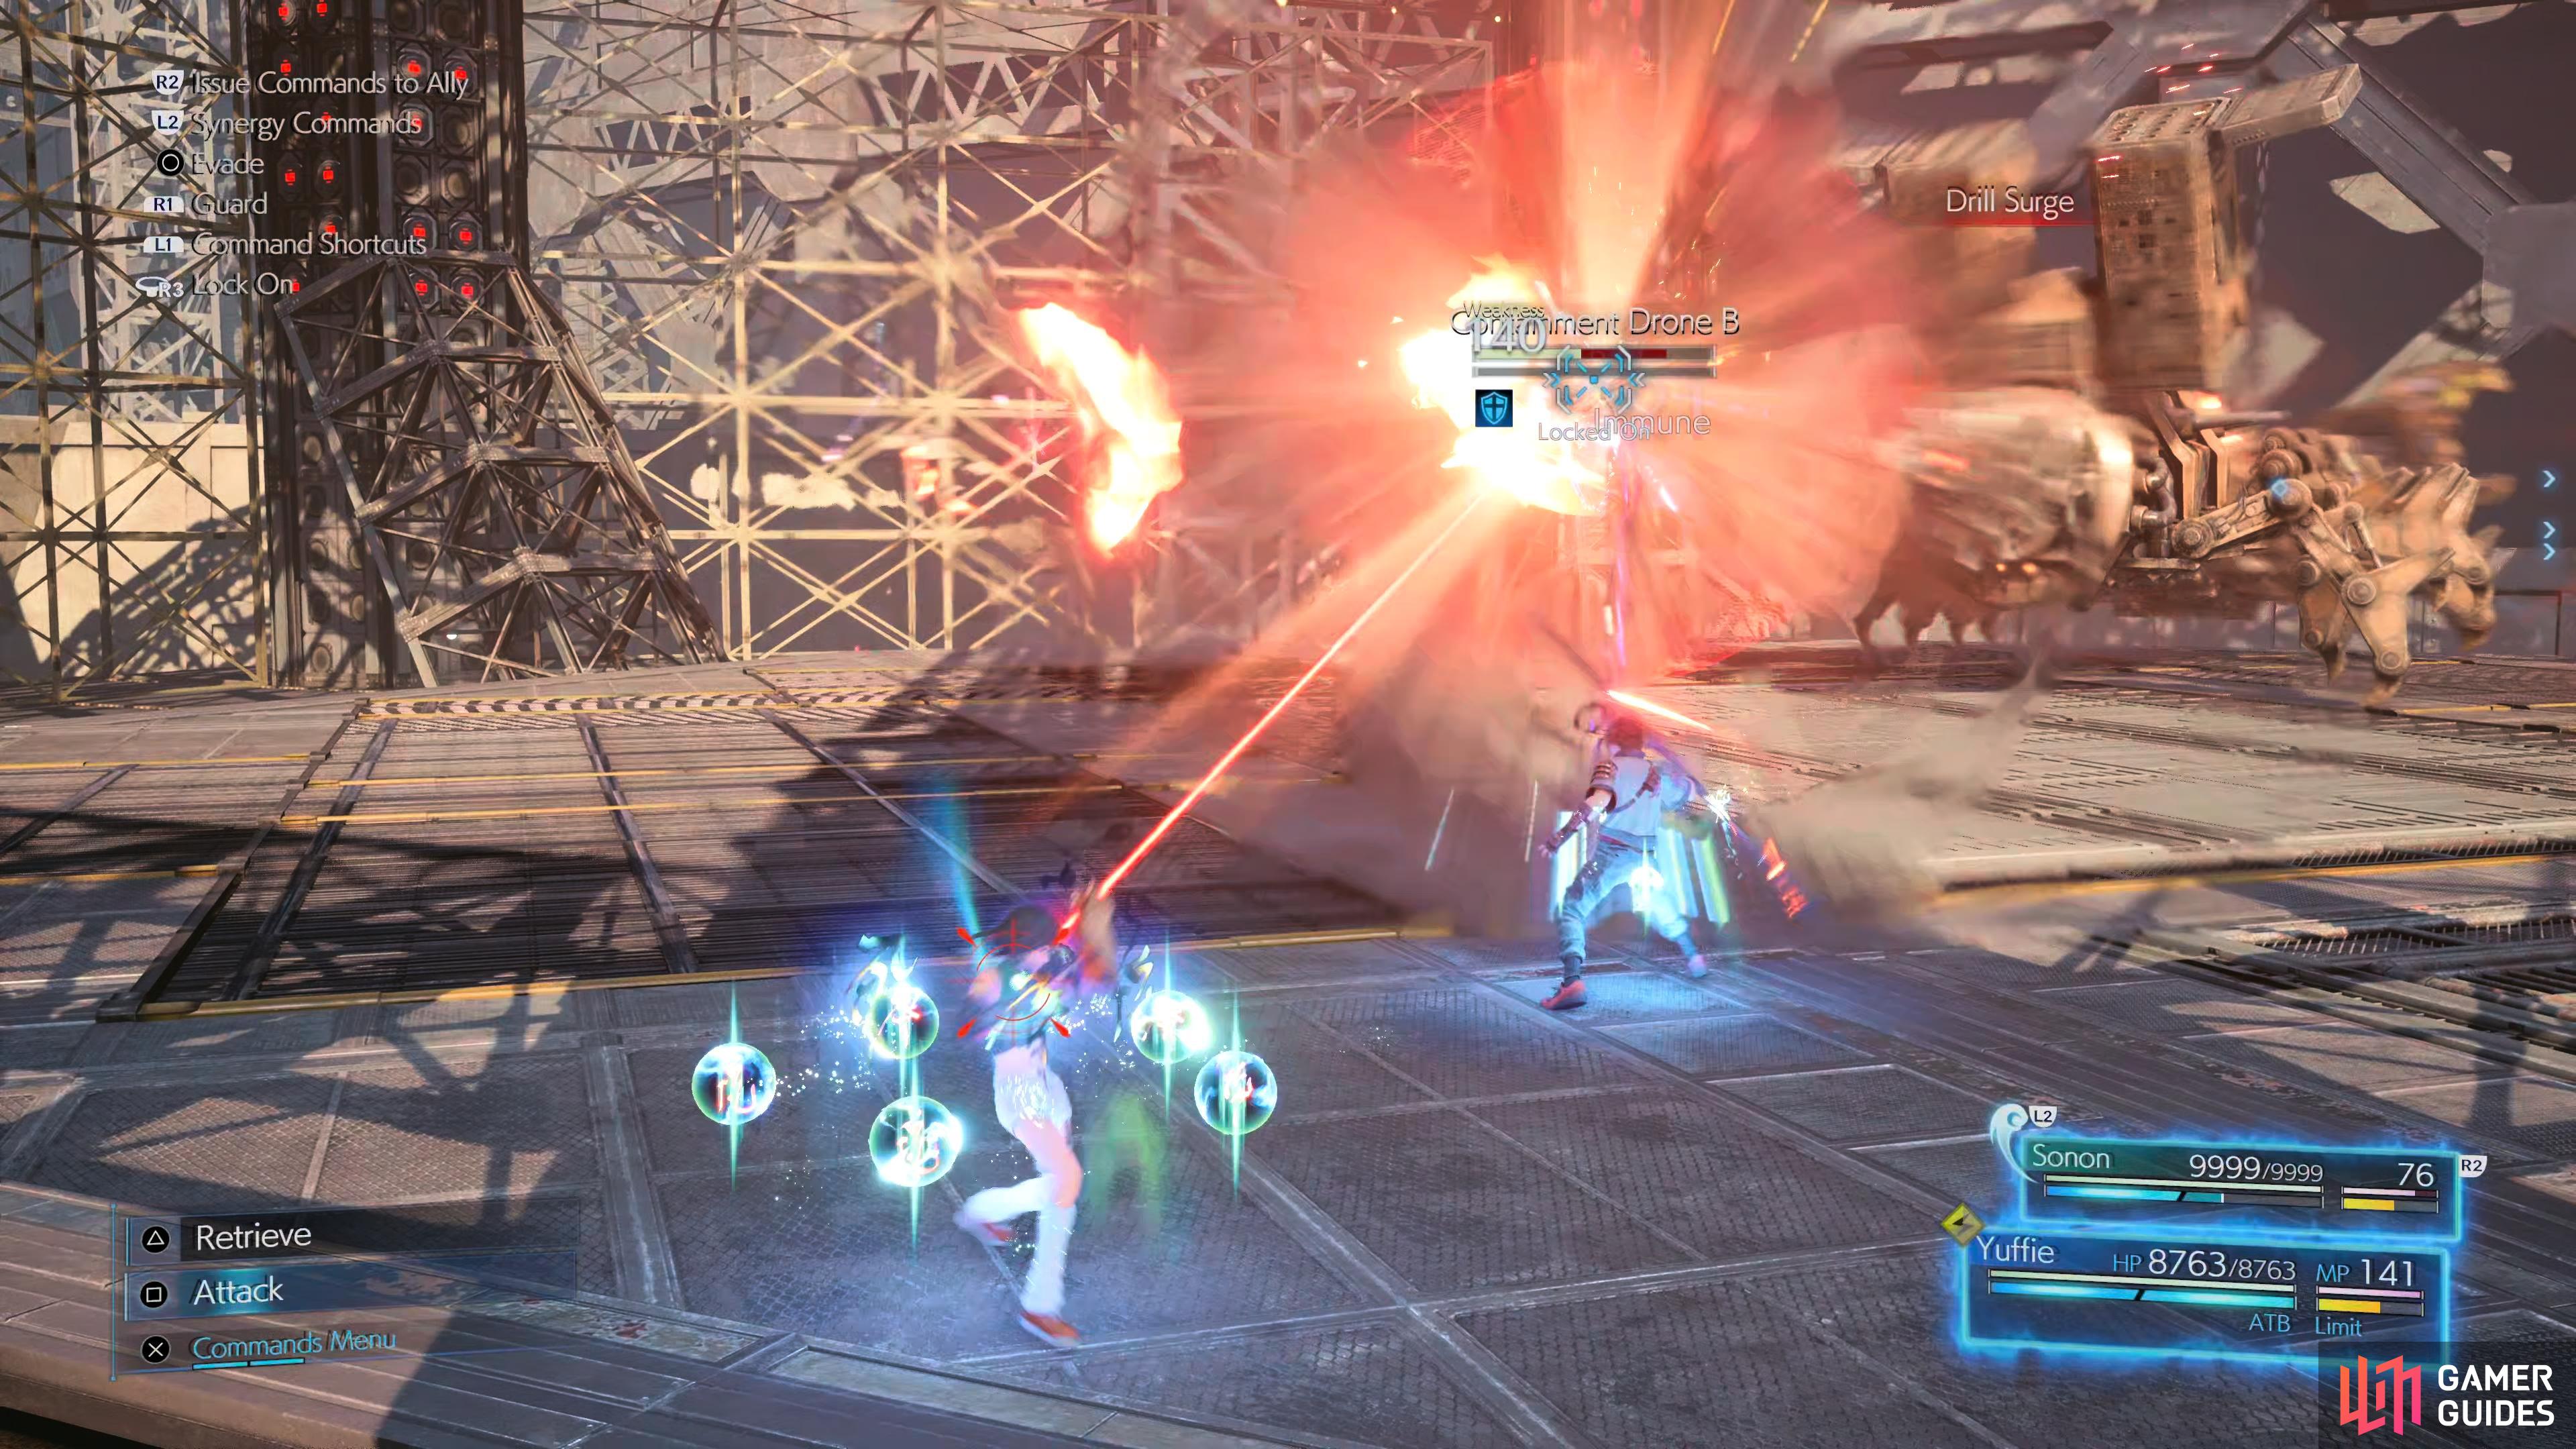 while you'll want to switch to Lightning Ninjutsu for the Drones with Reflect.